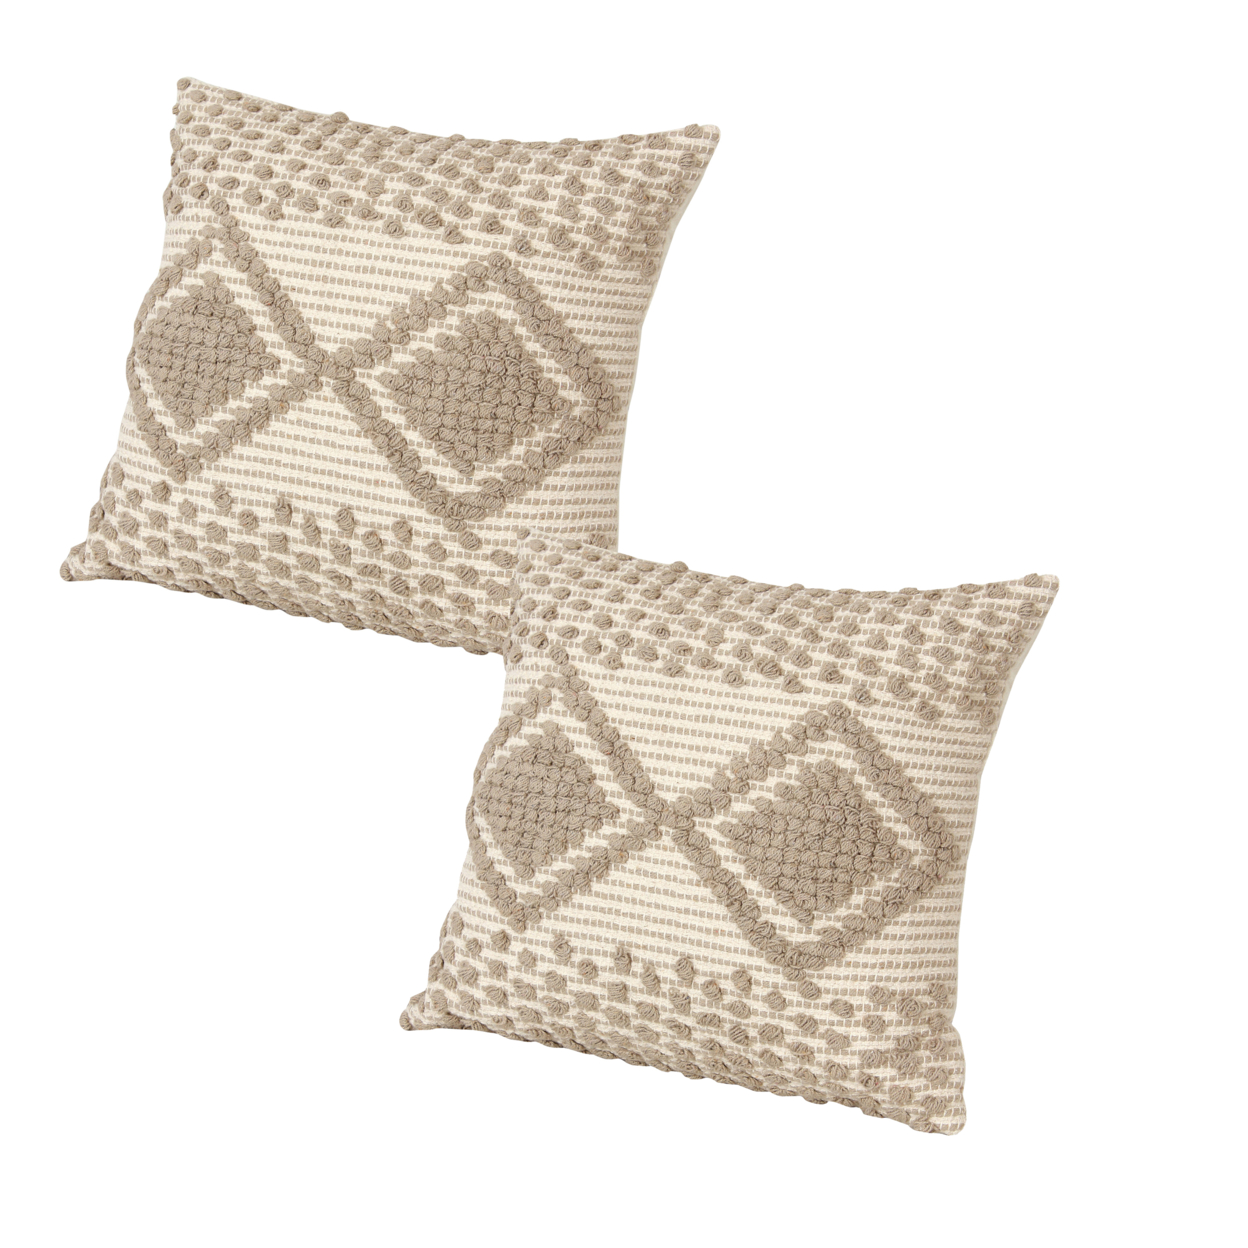 18 X 18 Square Cotton Decorative Accent Throw Pillow, Raised Diamond Embroidery, Set Of 2, Beige